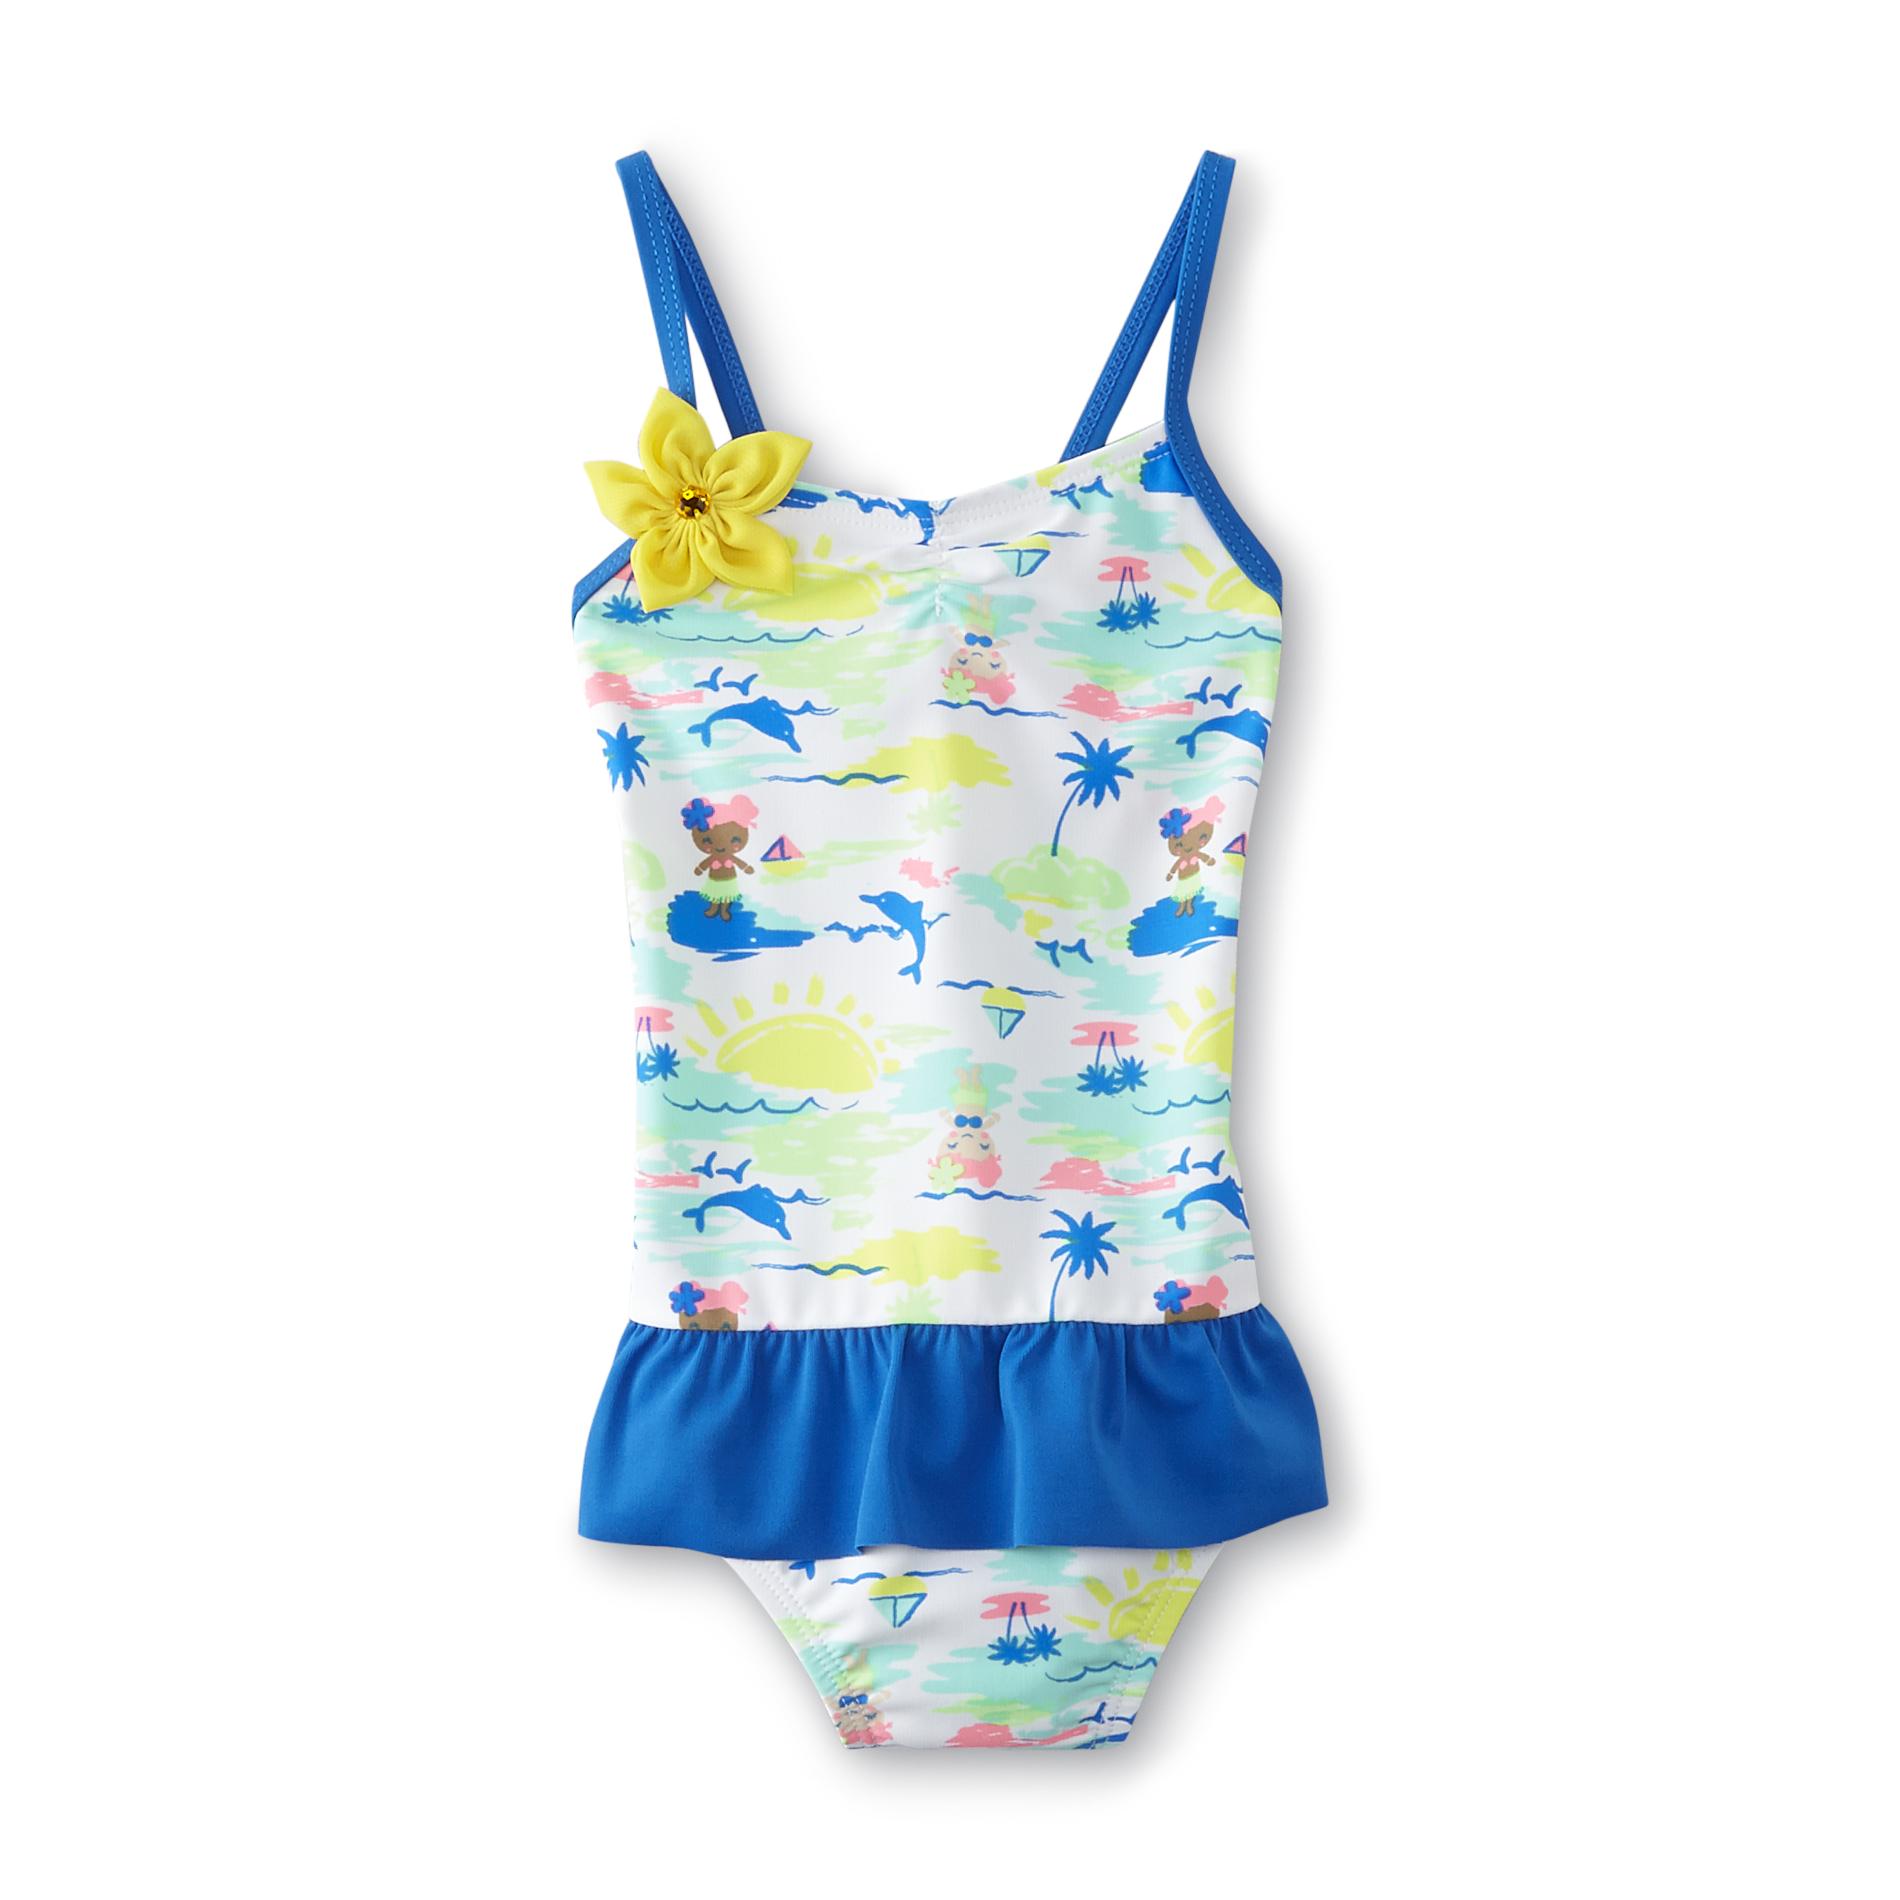 WonderKids Infant & Toddler Girl's Skirted One-Piece Swimsuit - Dolphins